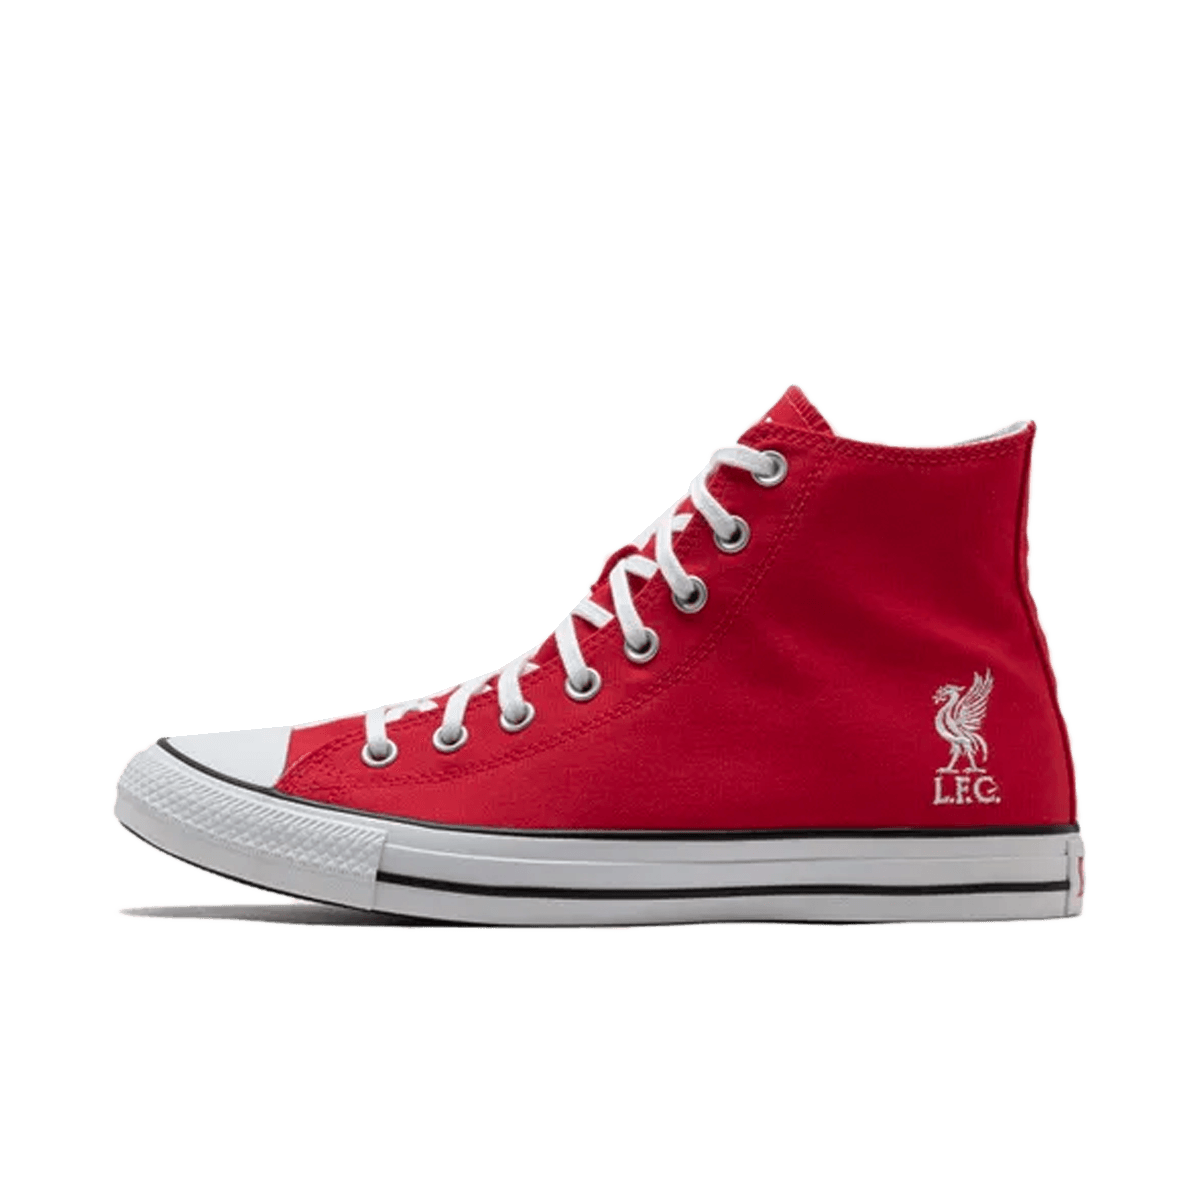 Liverpool FC x Converse Chuck Taylor All Star 'Red' A07260C